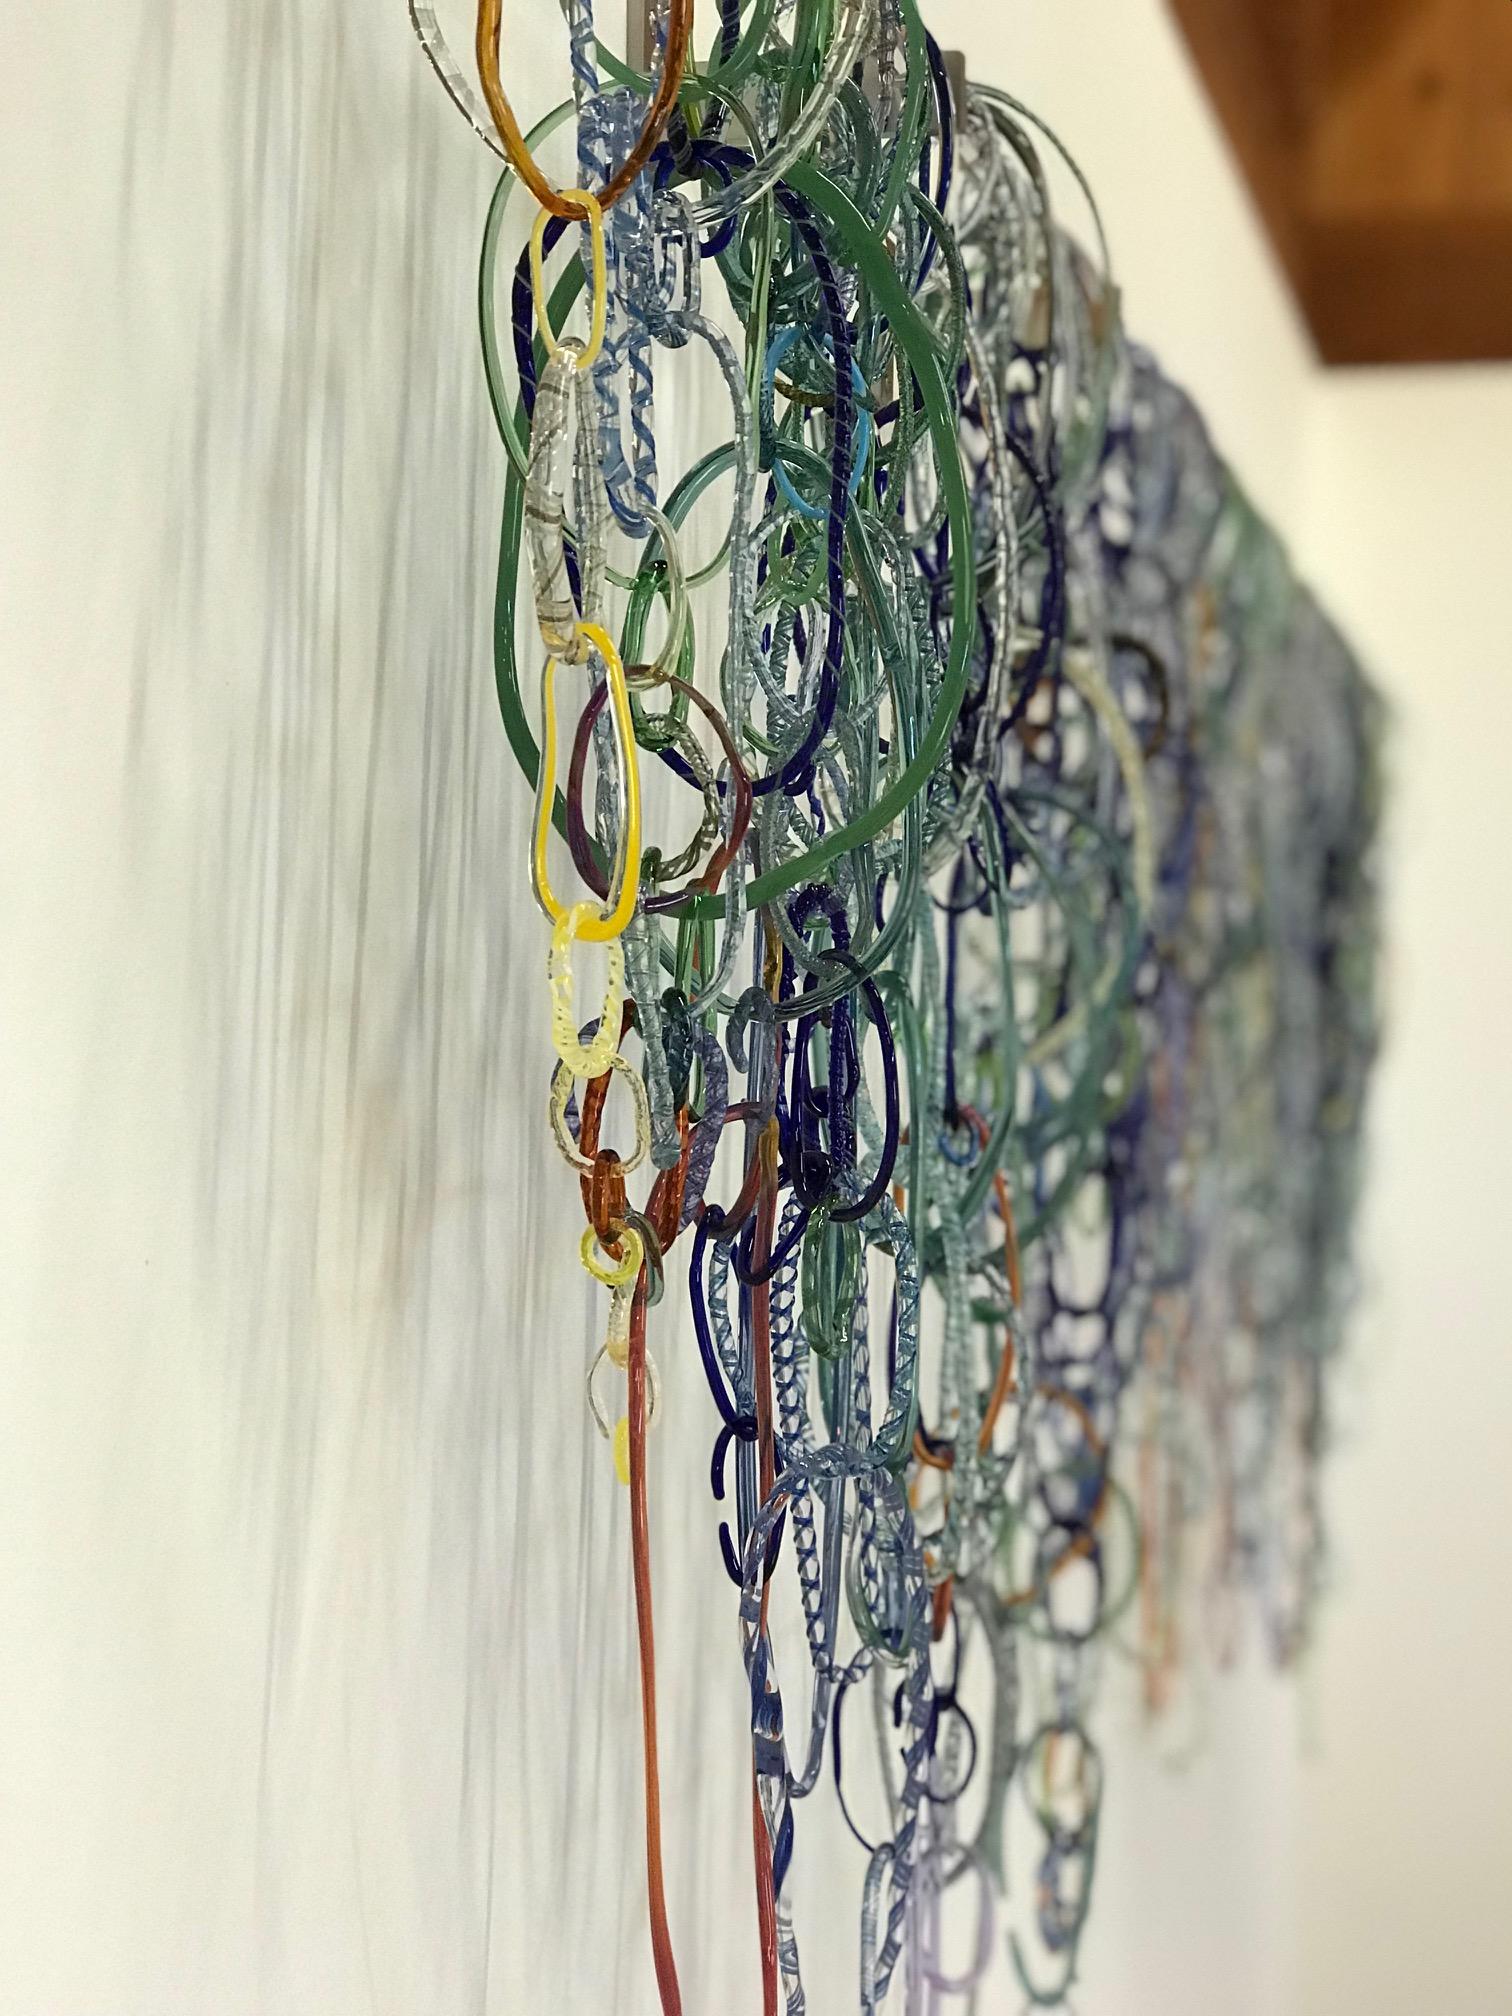 Mianas Moss, Large Hanging Wall Sculpture with Blue, Green, Brown Glass Loops - Beige Abstract Sculpture by David Licata